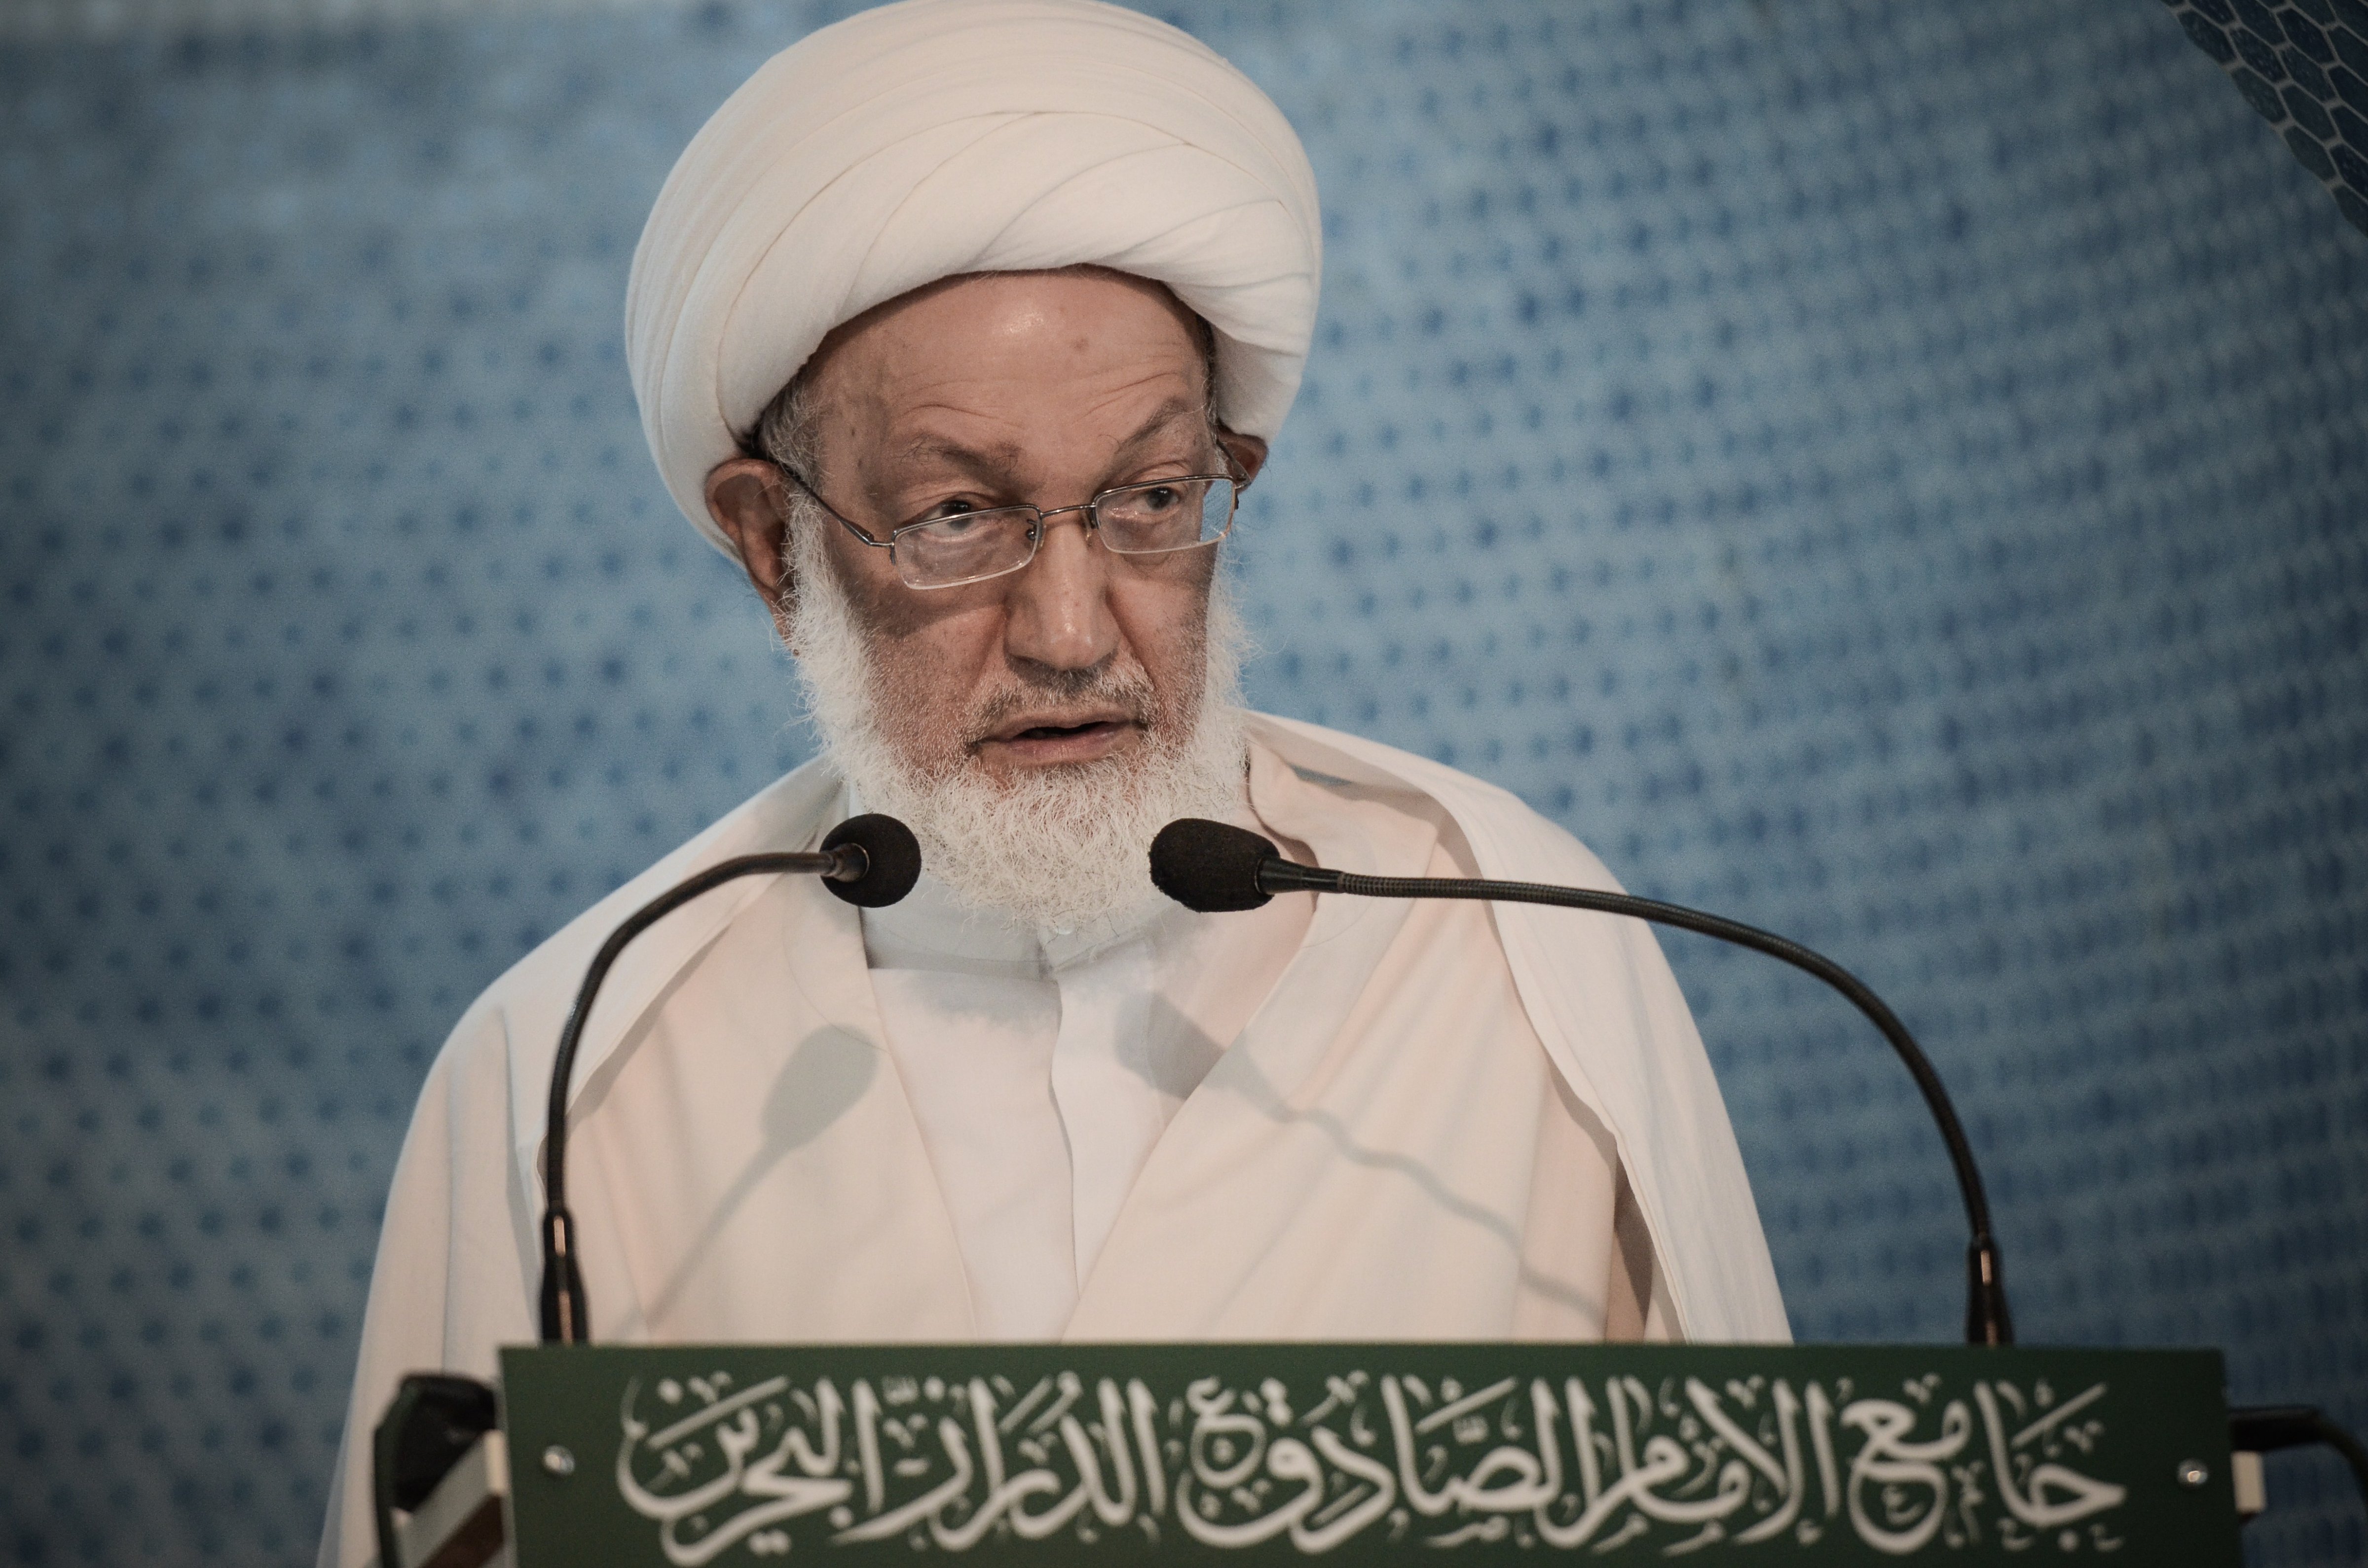 Bahraini top senior Shi‘ite cleric, Sheik Isa Qassim, gives a speech to worshippers during Friday prayer at a mosque in the village of Diraz, west of Bahrain's capital Manama, on May 17, 2013 (AFP—Getty Images)